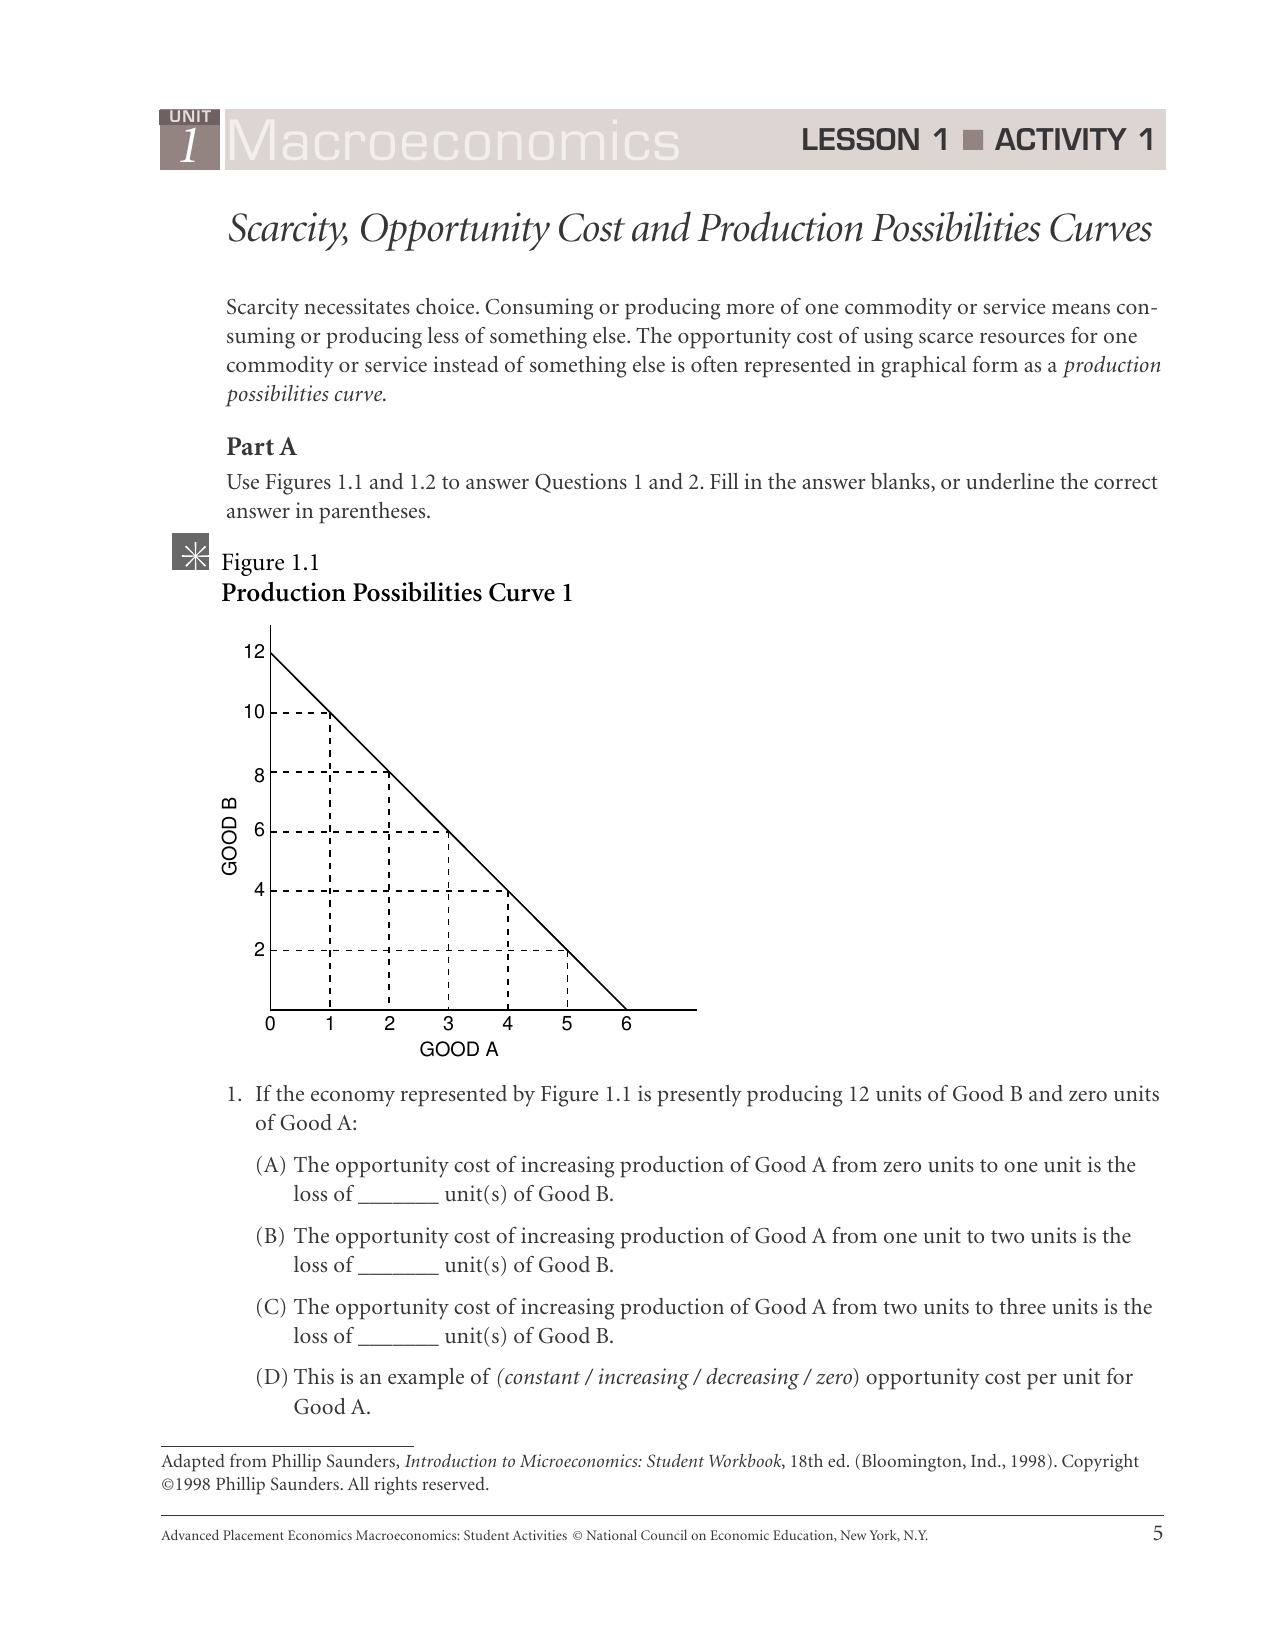 Scarcity, Opportunity Cost, and Production Possibilities Curves Throughout Production Possibilities Curve Worksheet Answers